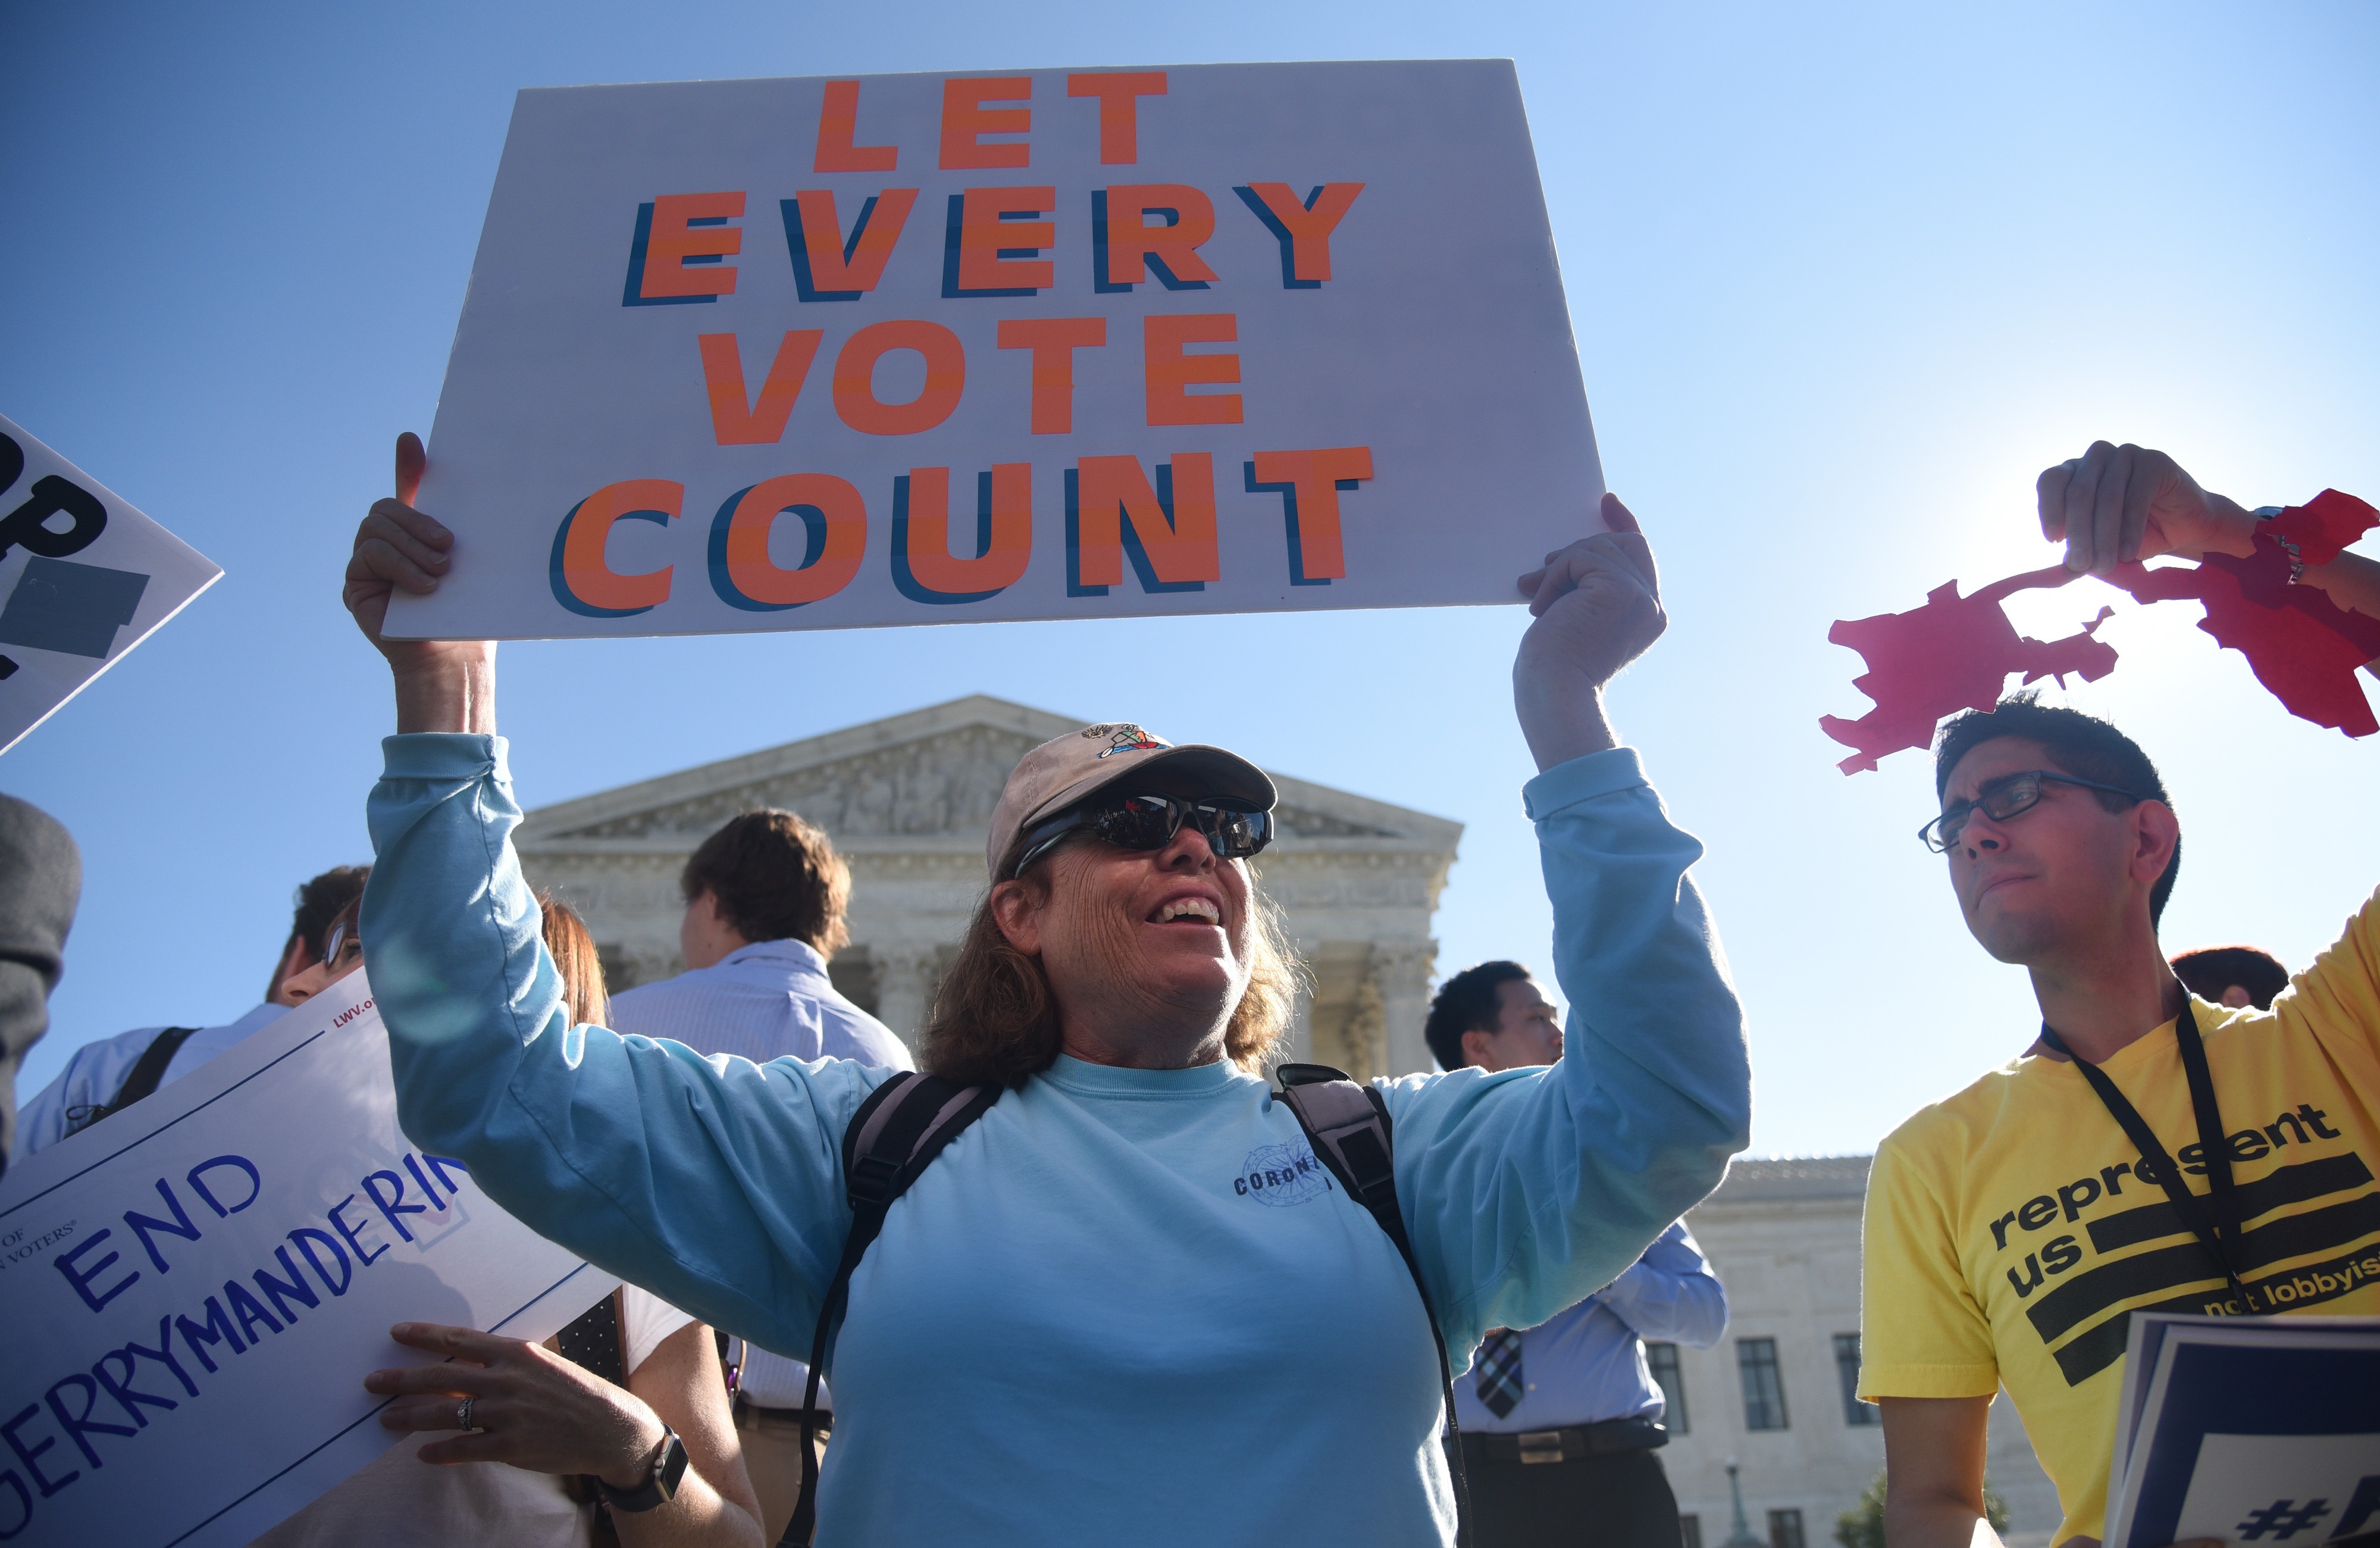 Demonstrators gather outside of the Supreme Court to call for an end to partisan gerrymandering on October 3, 2017. (Olivier Douliery/Getty Images)